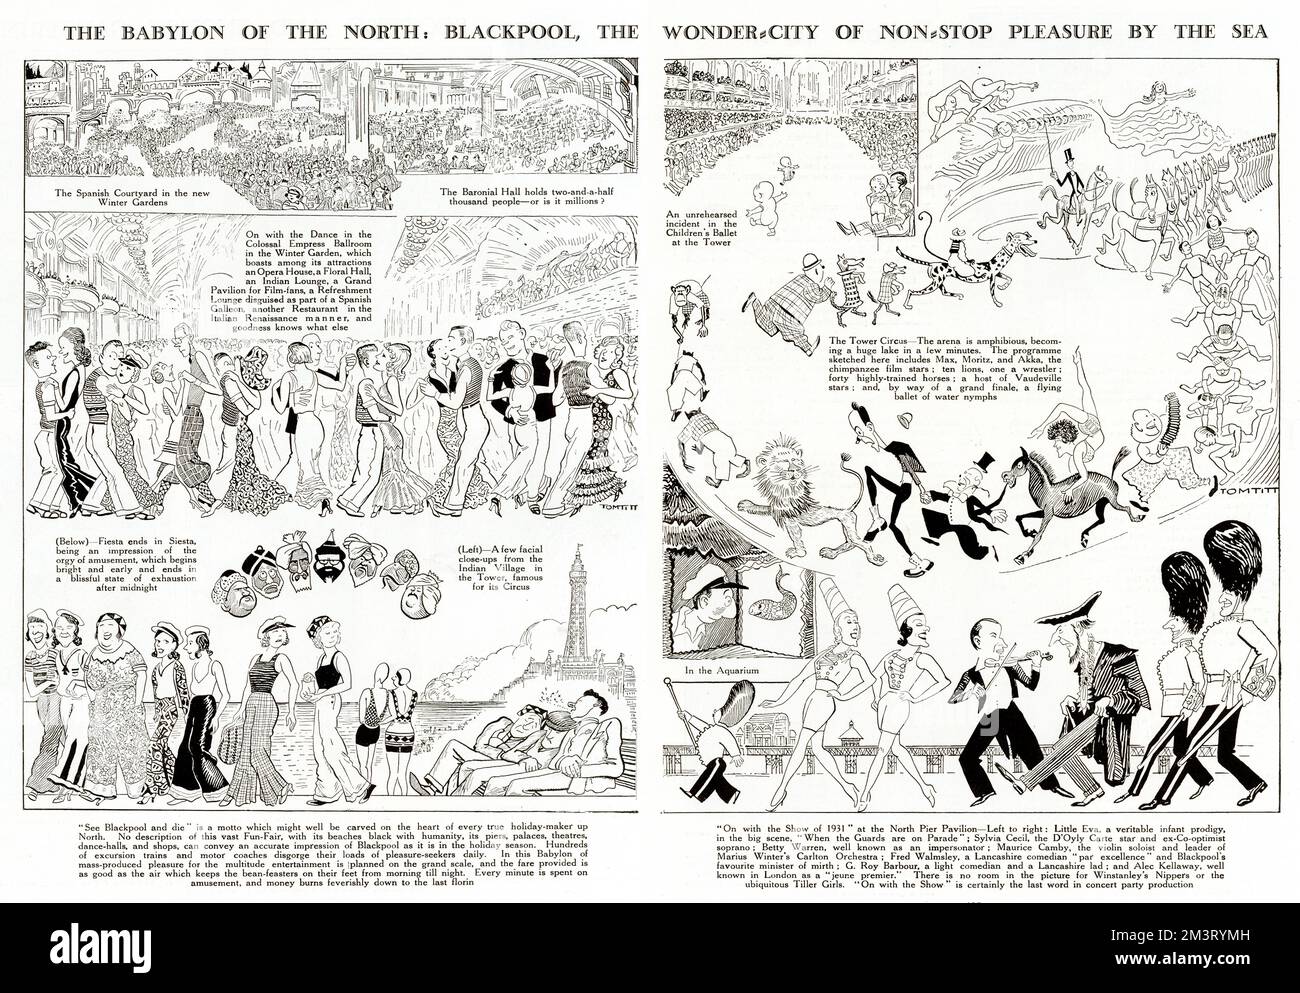 Detailed double page spread by Tom Titt in The Tatler reflecting the vast range of amusements at Blackpool, described as, &quot;the Babylon of the North...the wonder-city of non-stop pleasure by the sea.&quot; Featured is a dance in the Empress ballroom of the Winter Gardens, the Spanish Courtyard of the Winter Gardens and the Baronial Hall. Also, holidaymakers (some in beach pyjamas) along Blackpool's famous Golden Mile, the Tower Circus and chacters from &quot;On with the Show of 1931&quot; at the North Pier Pavilion.      Date: 1931 Stock Photo